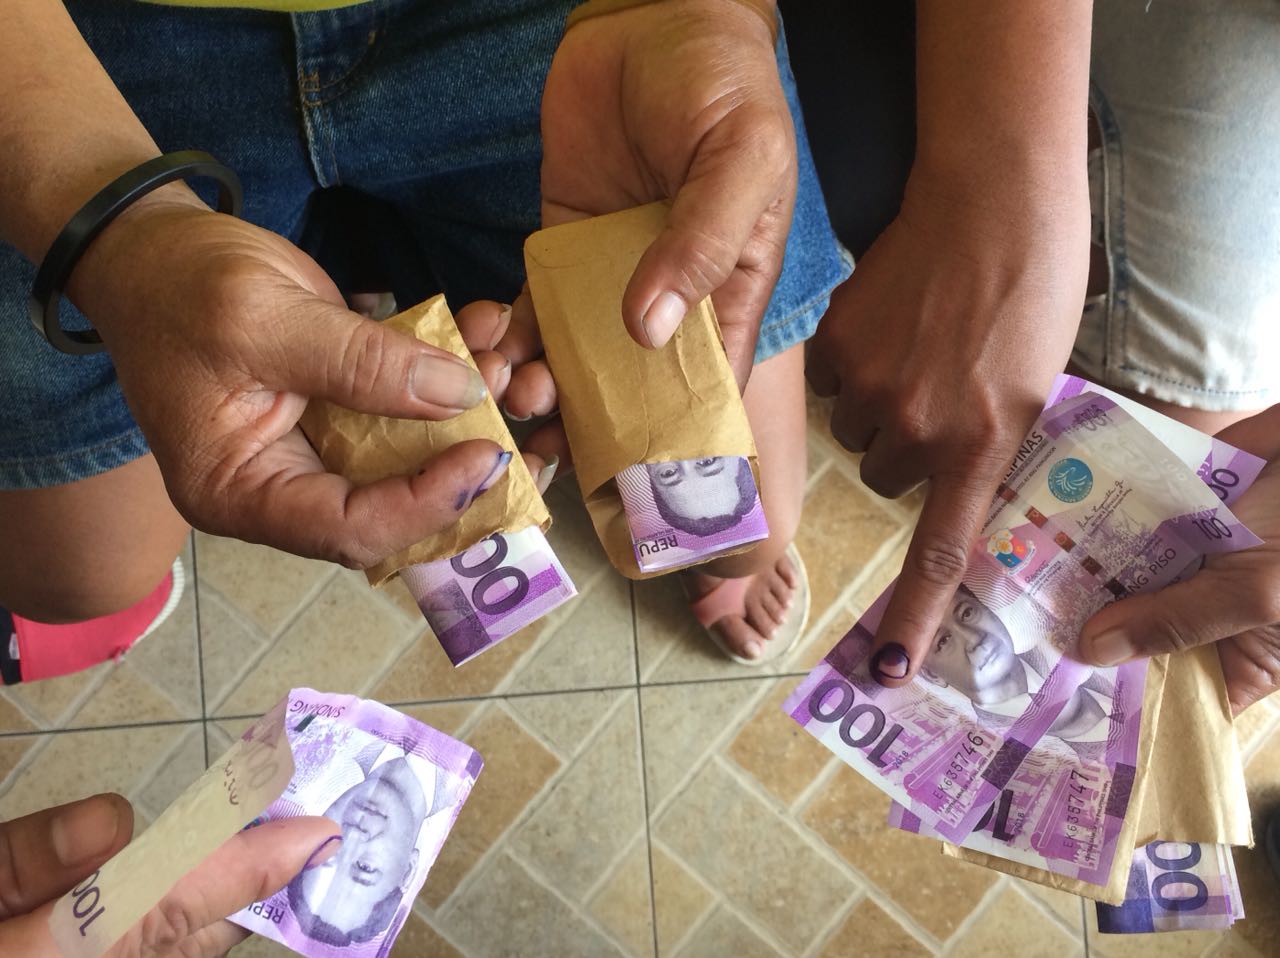 Worker, minor nabbed for alleged vote-buying in Negros Occidental town